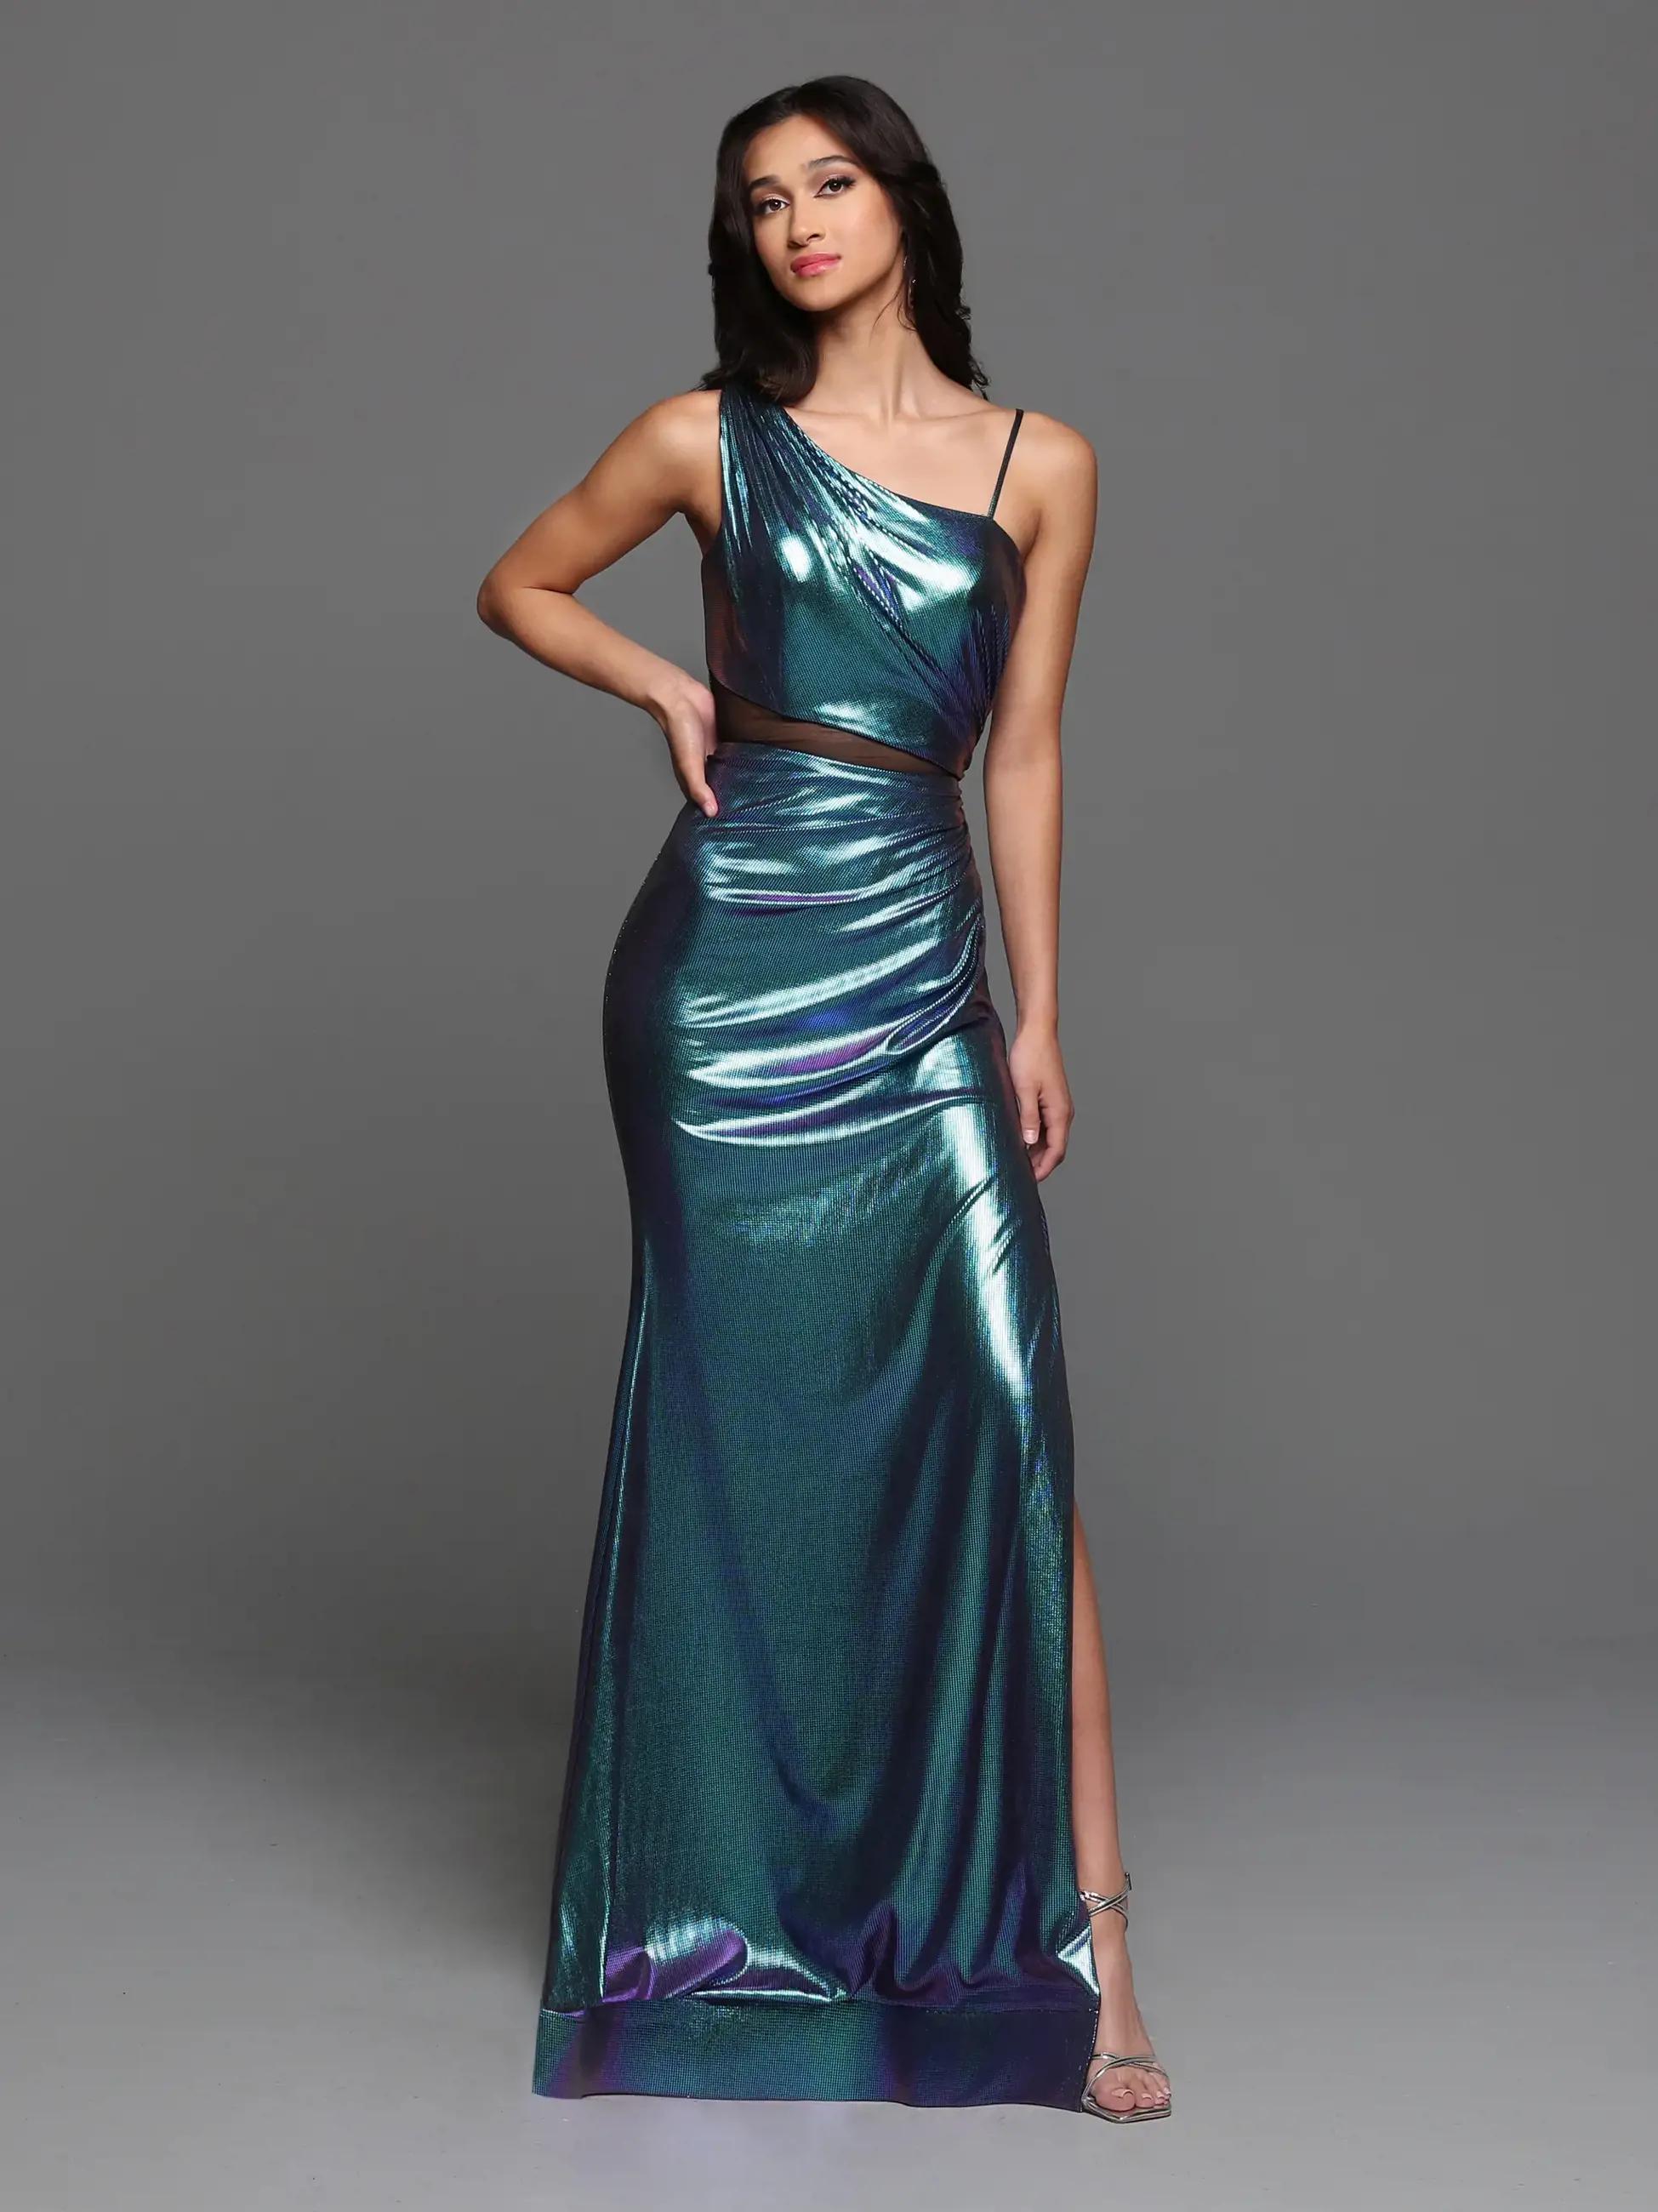 Model wearing a gown by Sparkle Prom